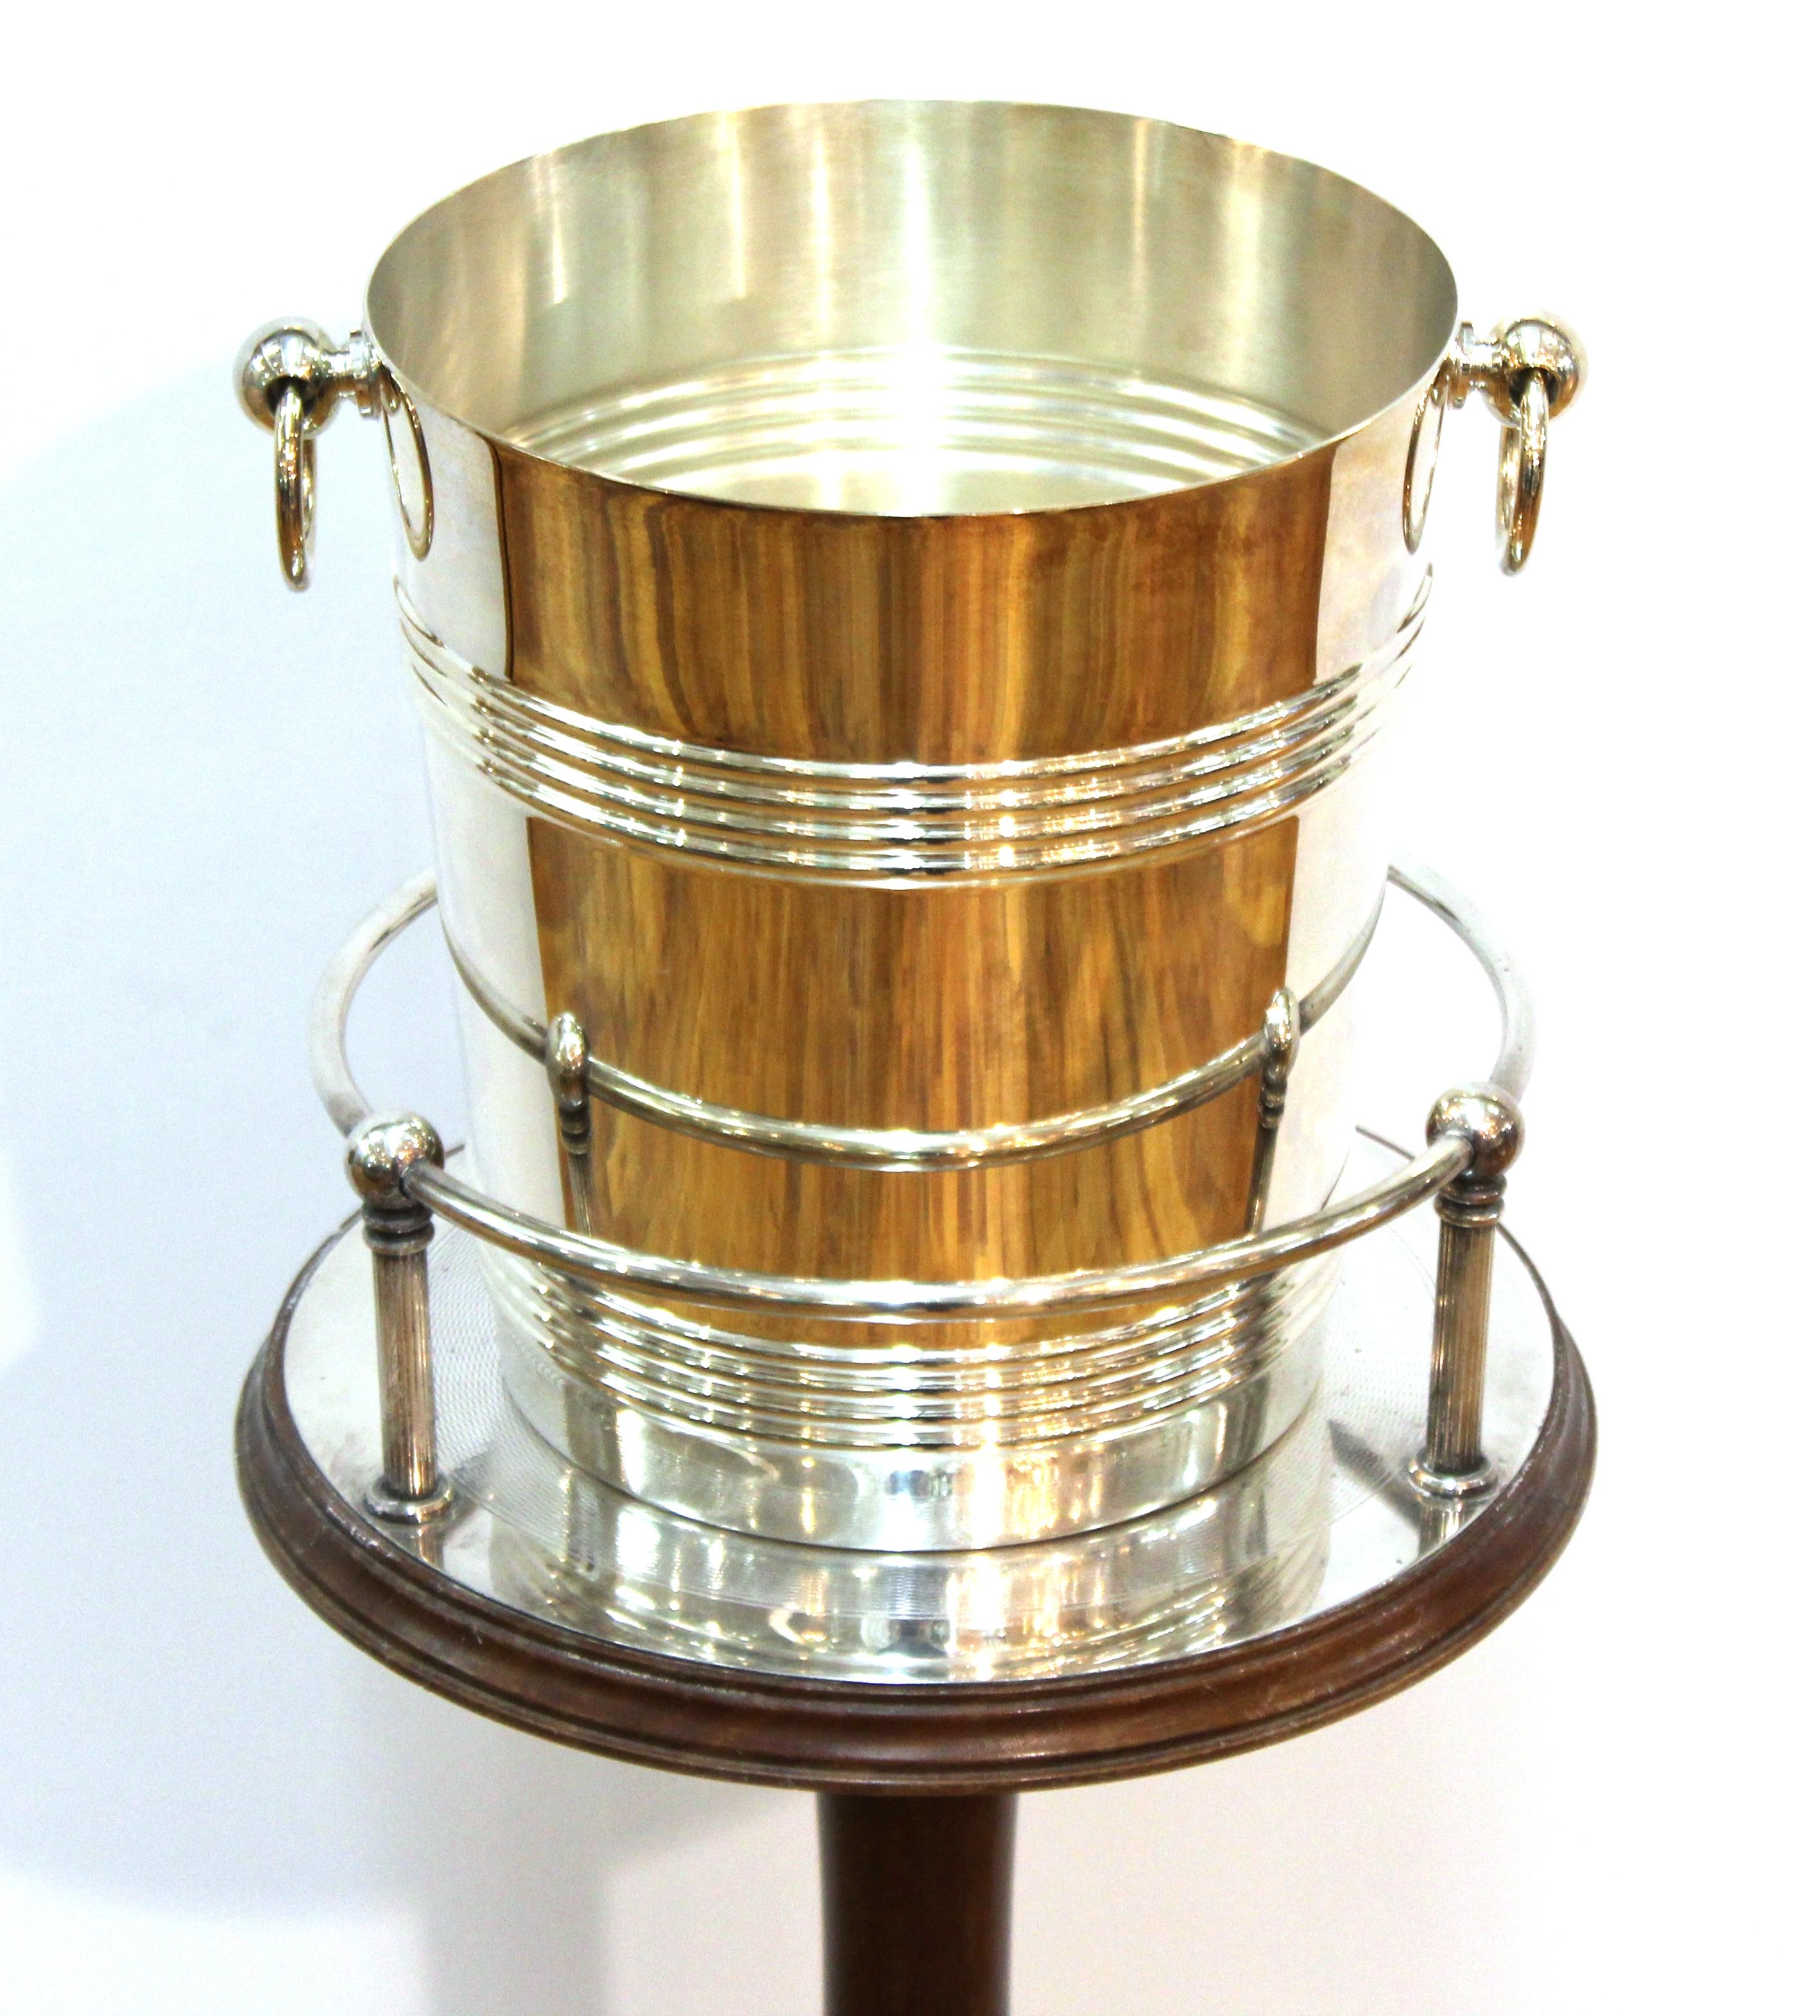 French Art Deco silver plated and mahogany champagne stand with coordinating silver plated champagne bucket, made by Christofle. Both pieces signed Christofle, made in France during the 1940s. Very good vintage condition with age-appropriate wear